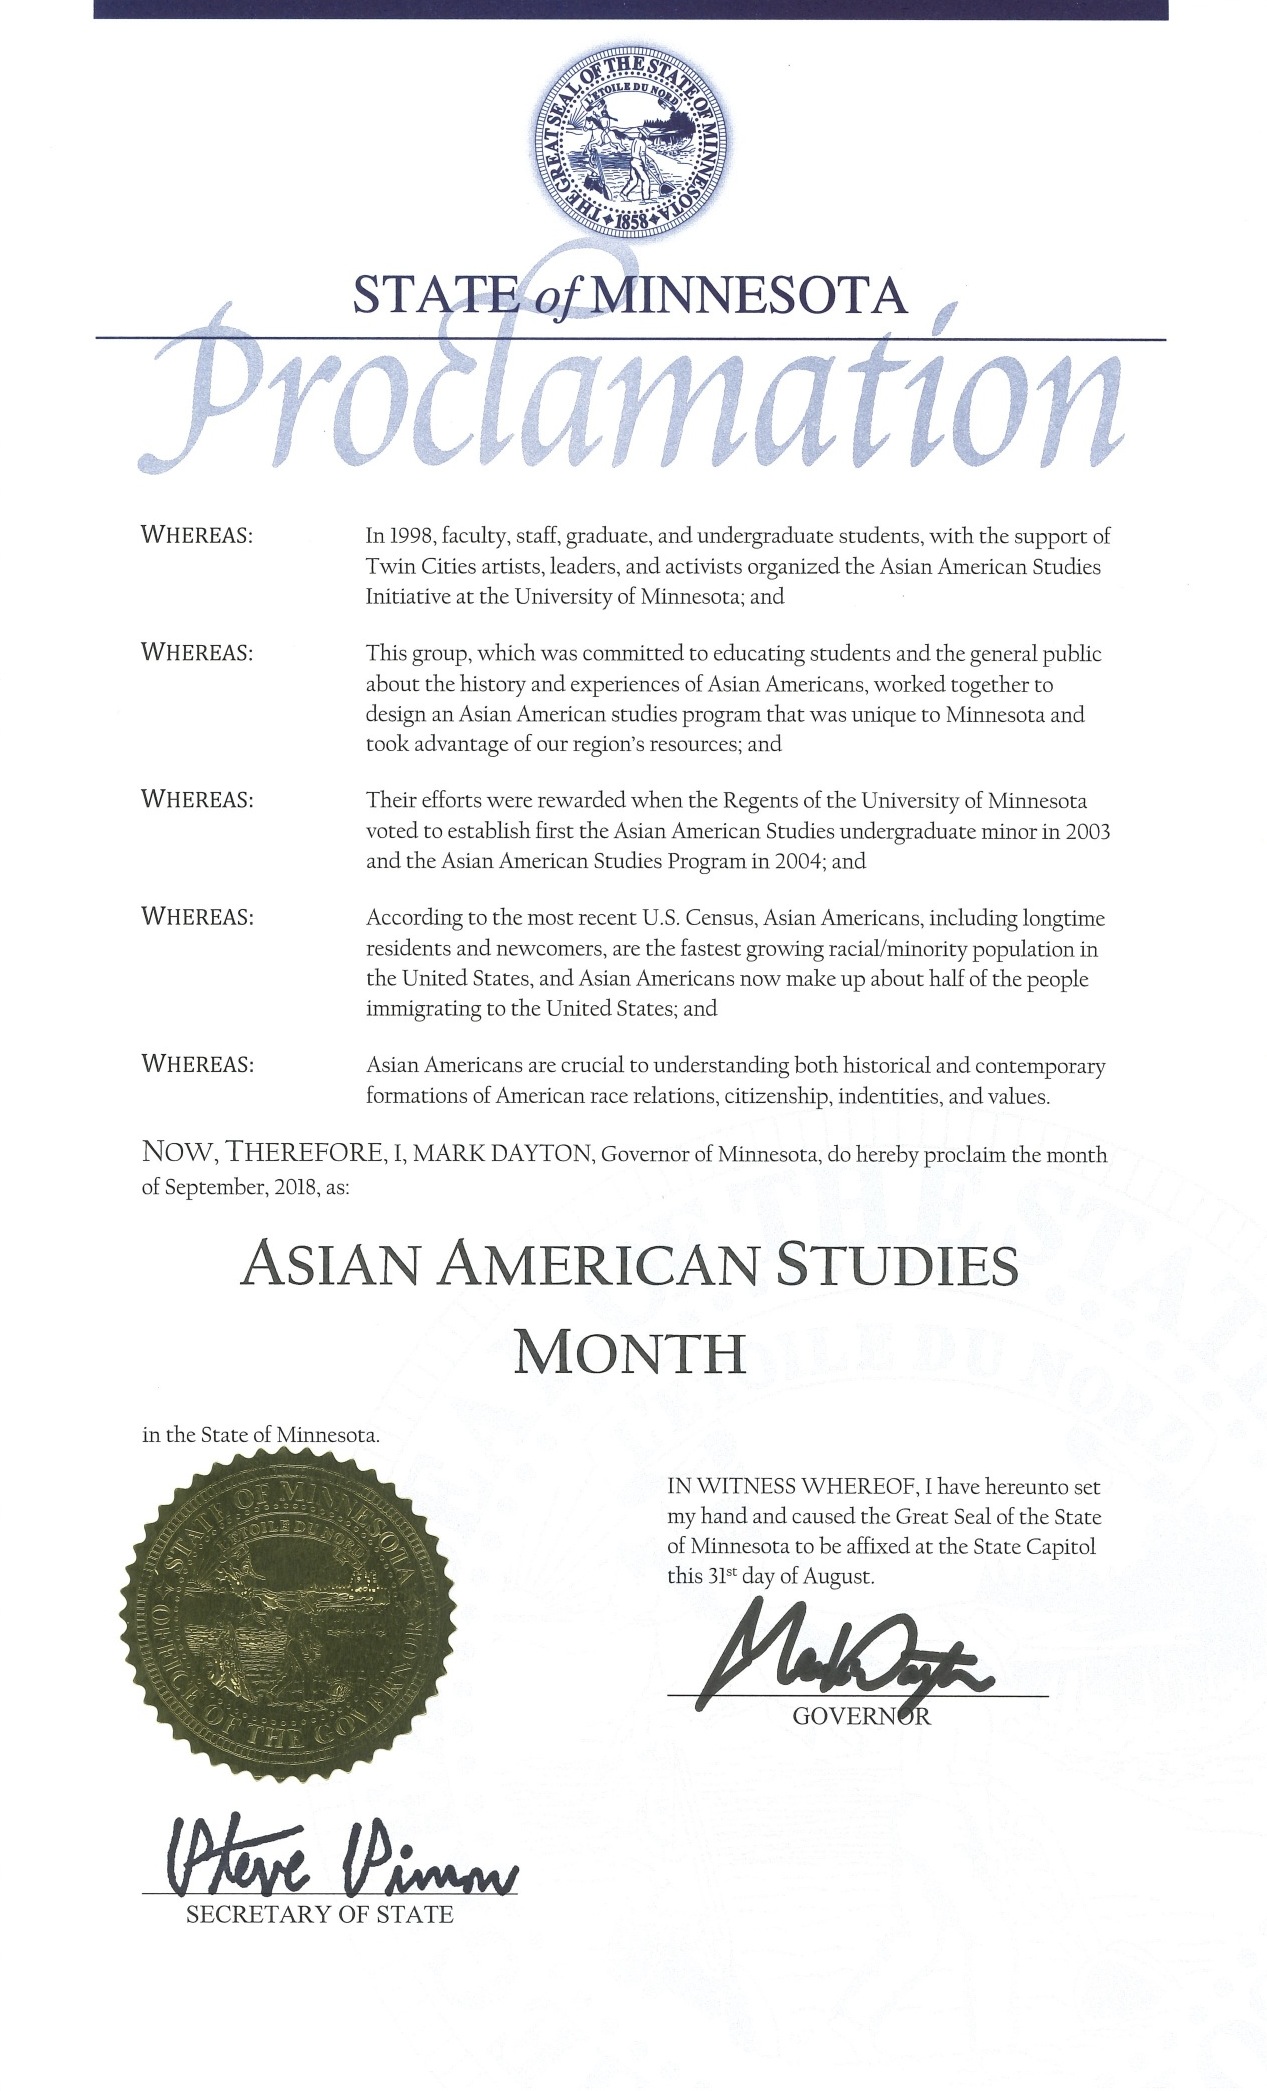 Image of the State of Minnesota Proclamation proclaiming Asian American Studies Month in September 2018